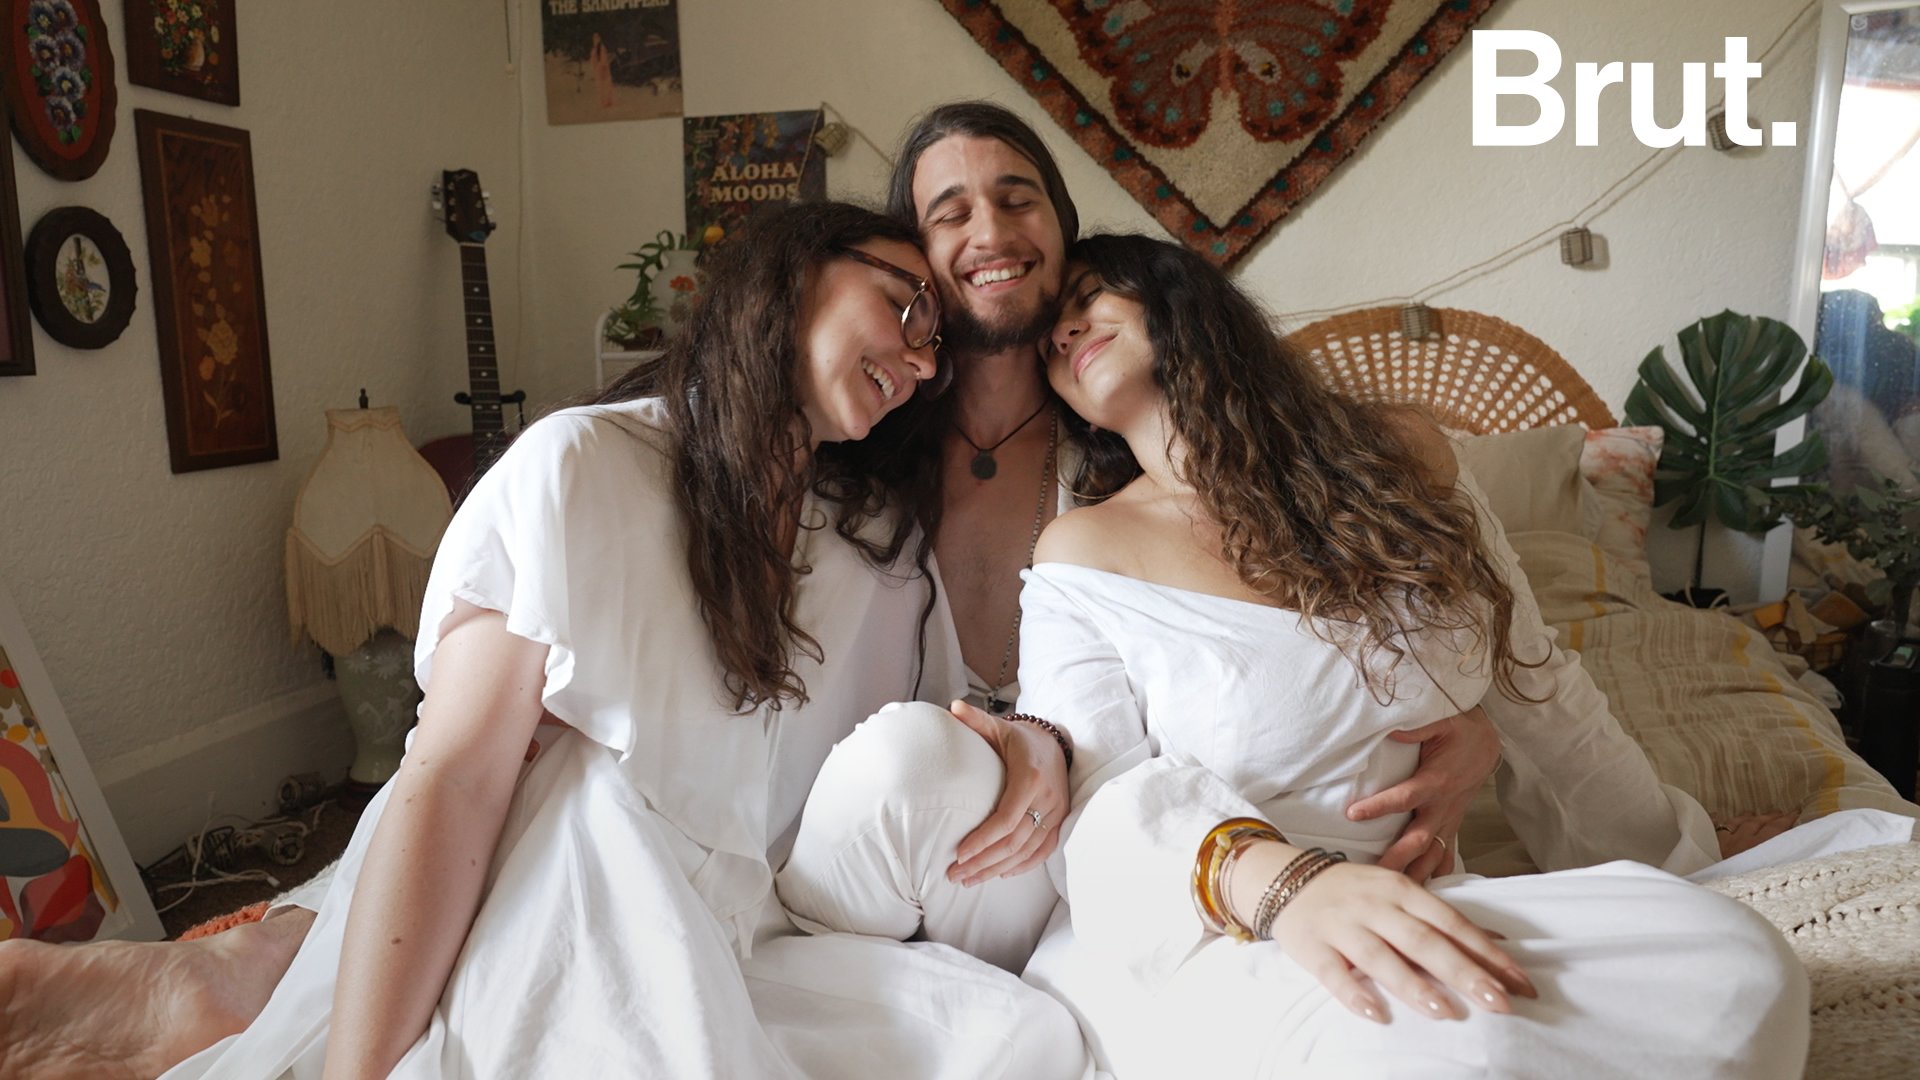 Here's what this throuple wants you to know about polyamory | Brut.